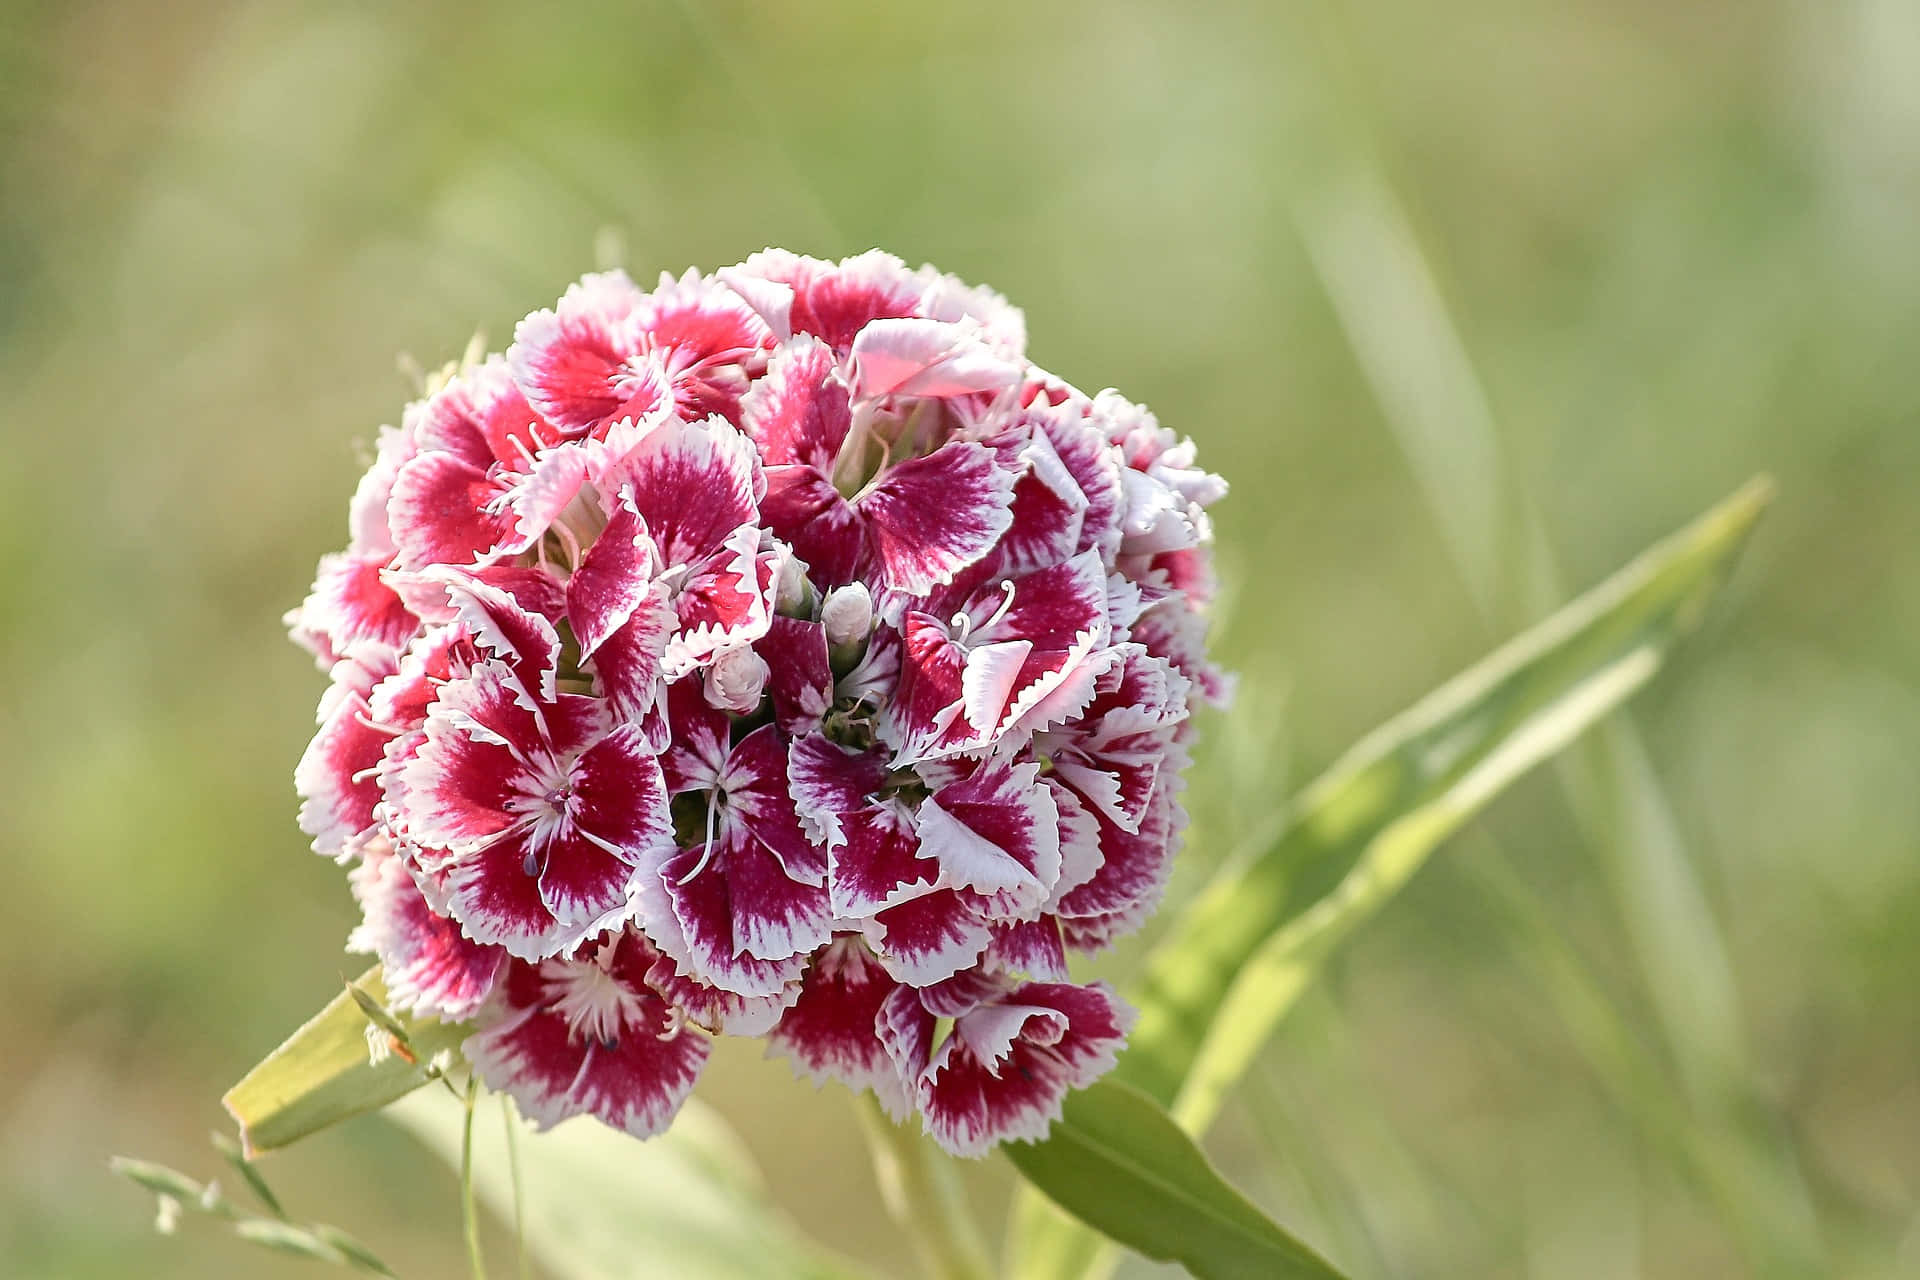 A beautiful close up shot of two pink carnations